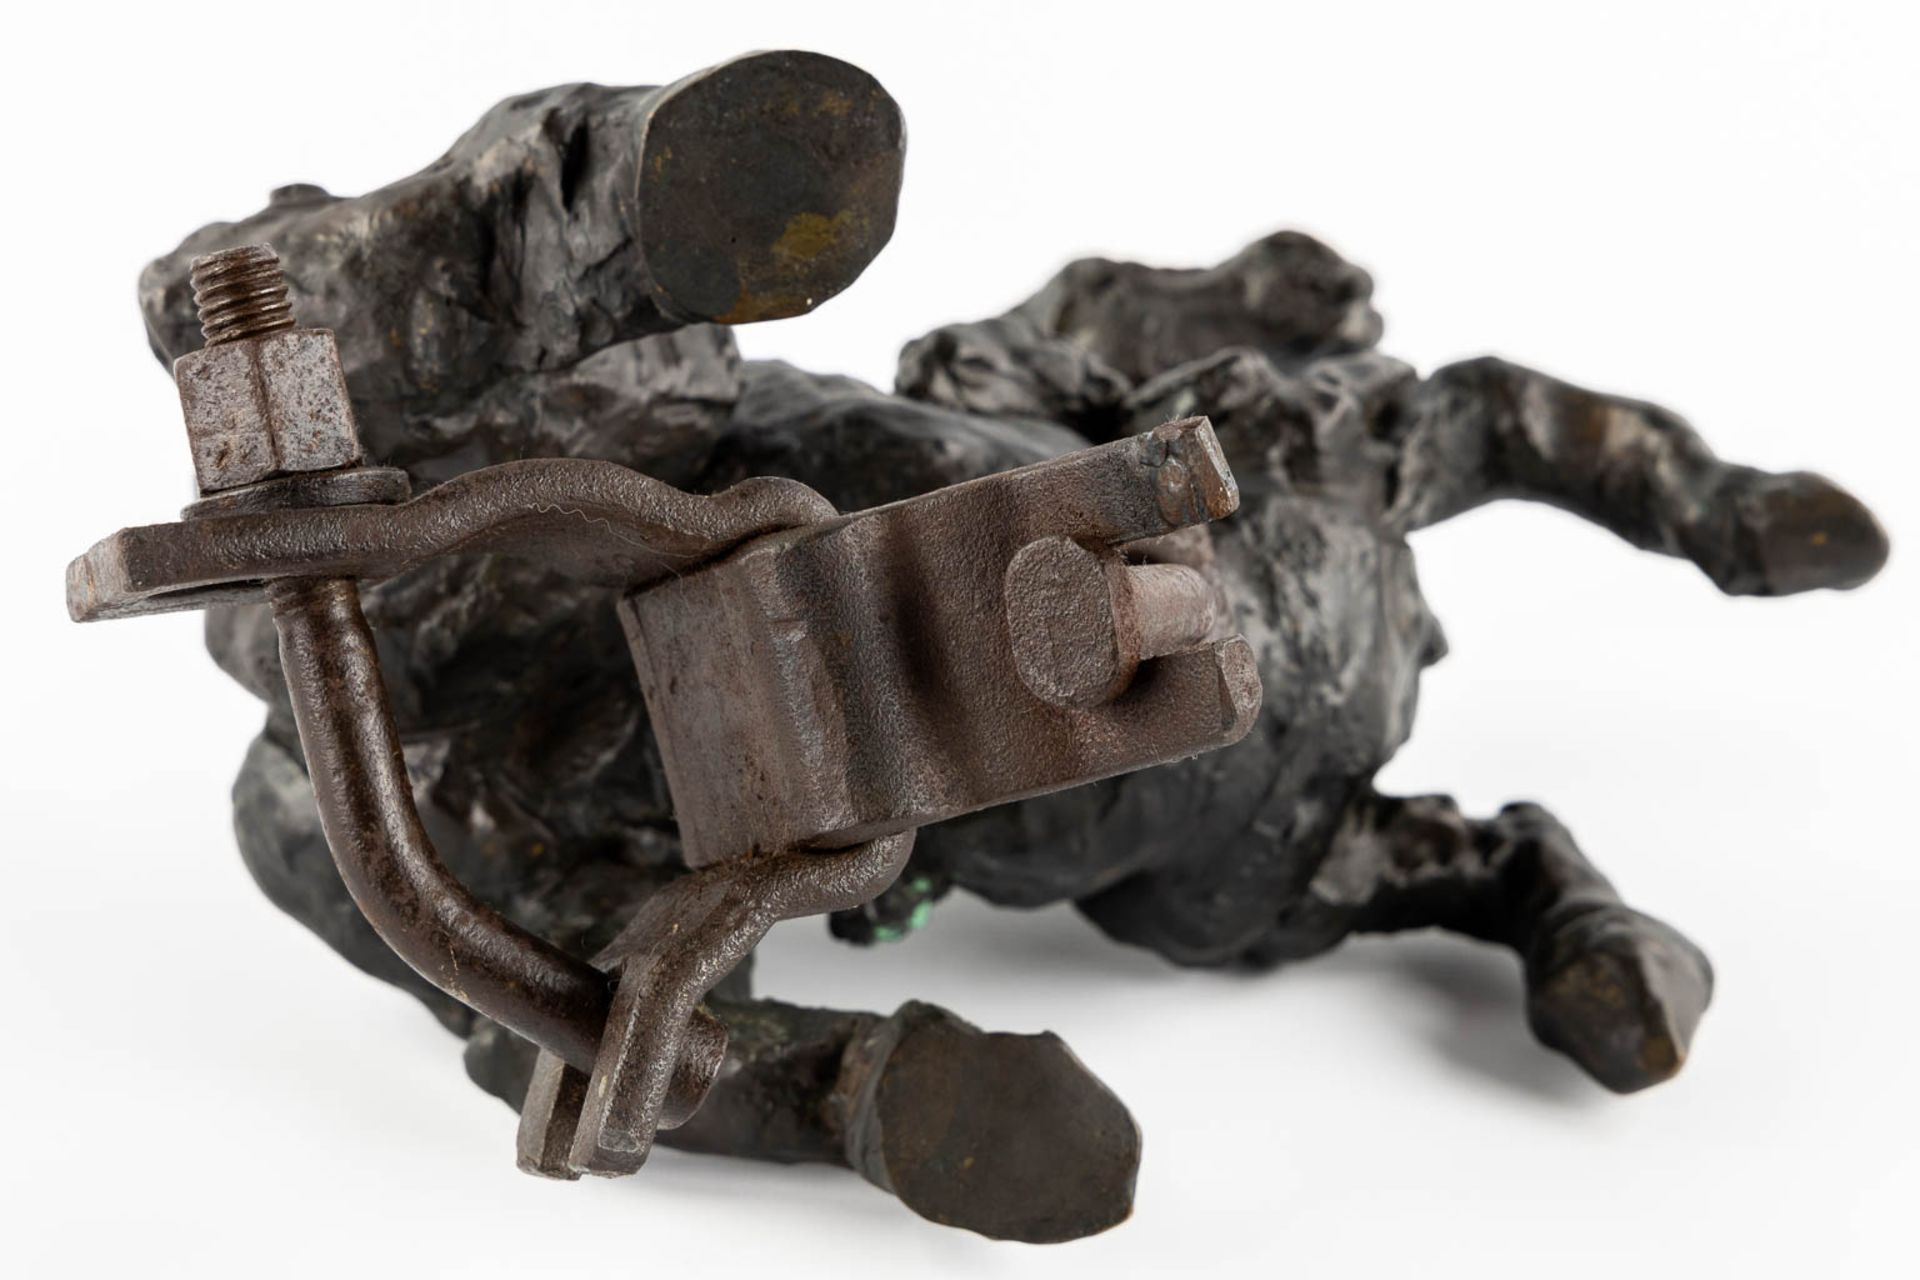 P. LAMBERT (XX) 'Riding a horse' patinated bronze, Ducros Foundry Mark. (L:15 x W:27 x H:28 cm) - Image 10 of 11